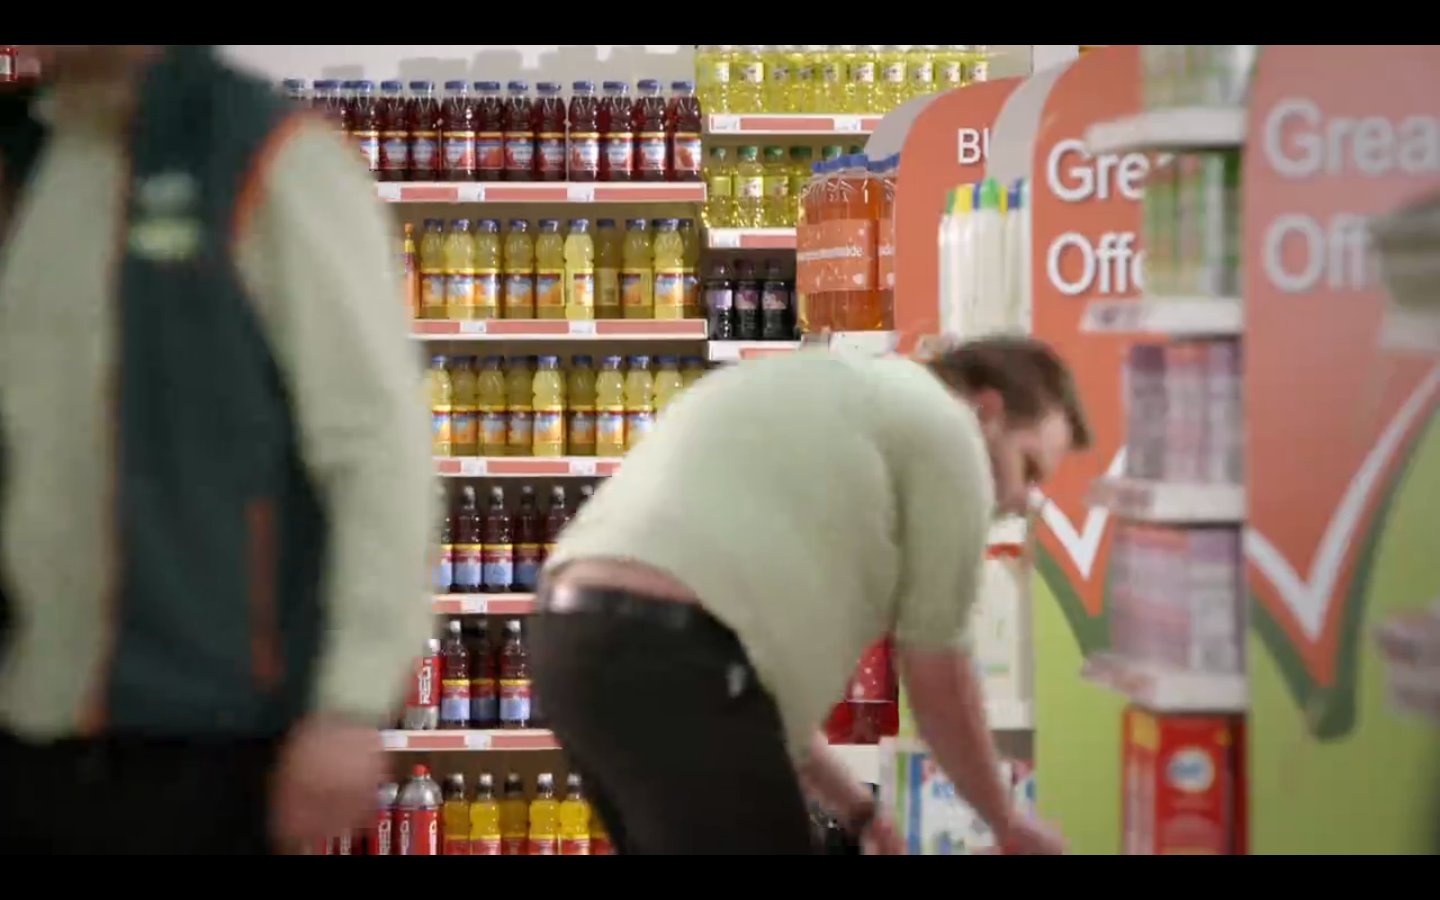 The first shot of Trollied